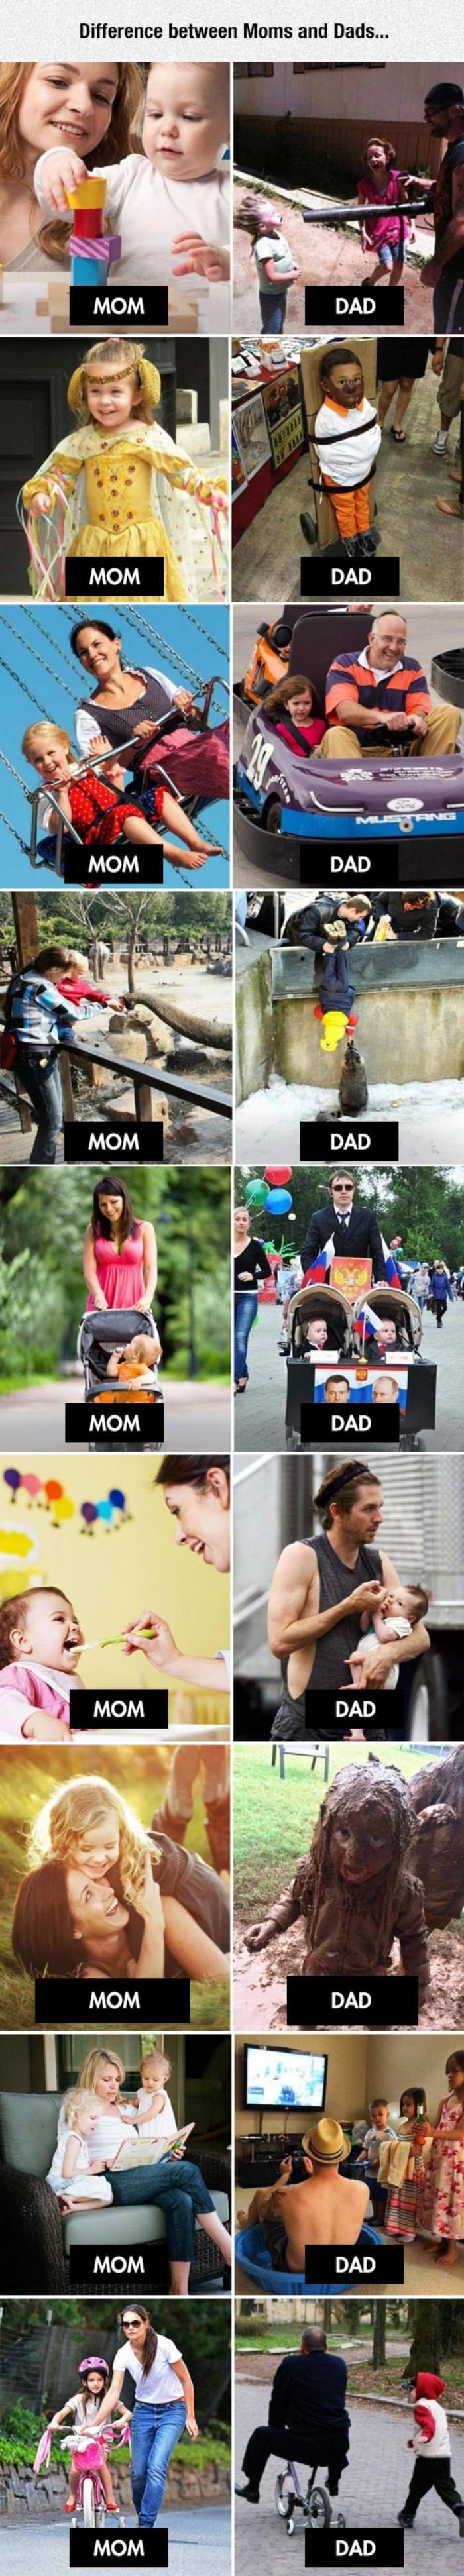 moms and dads funny picture